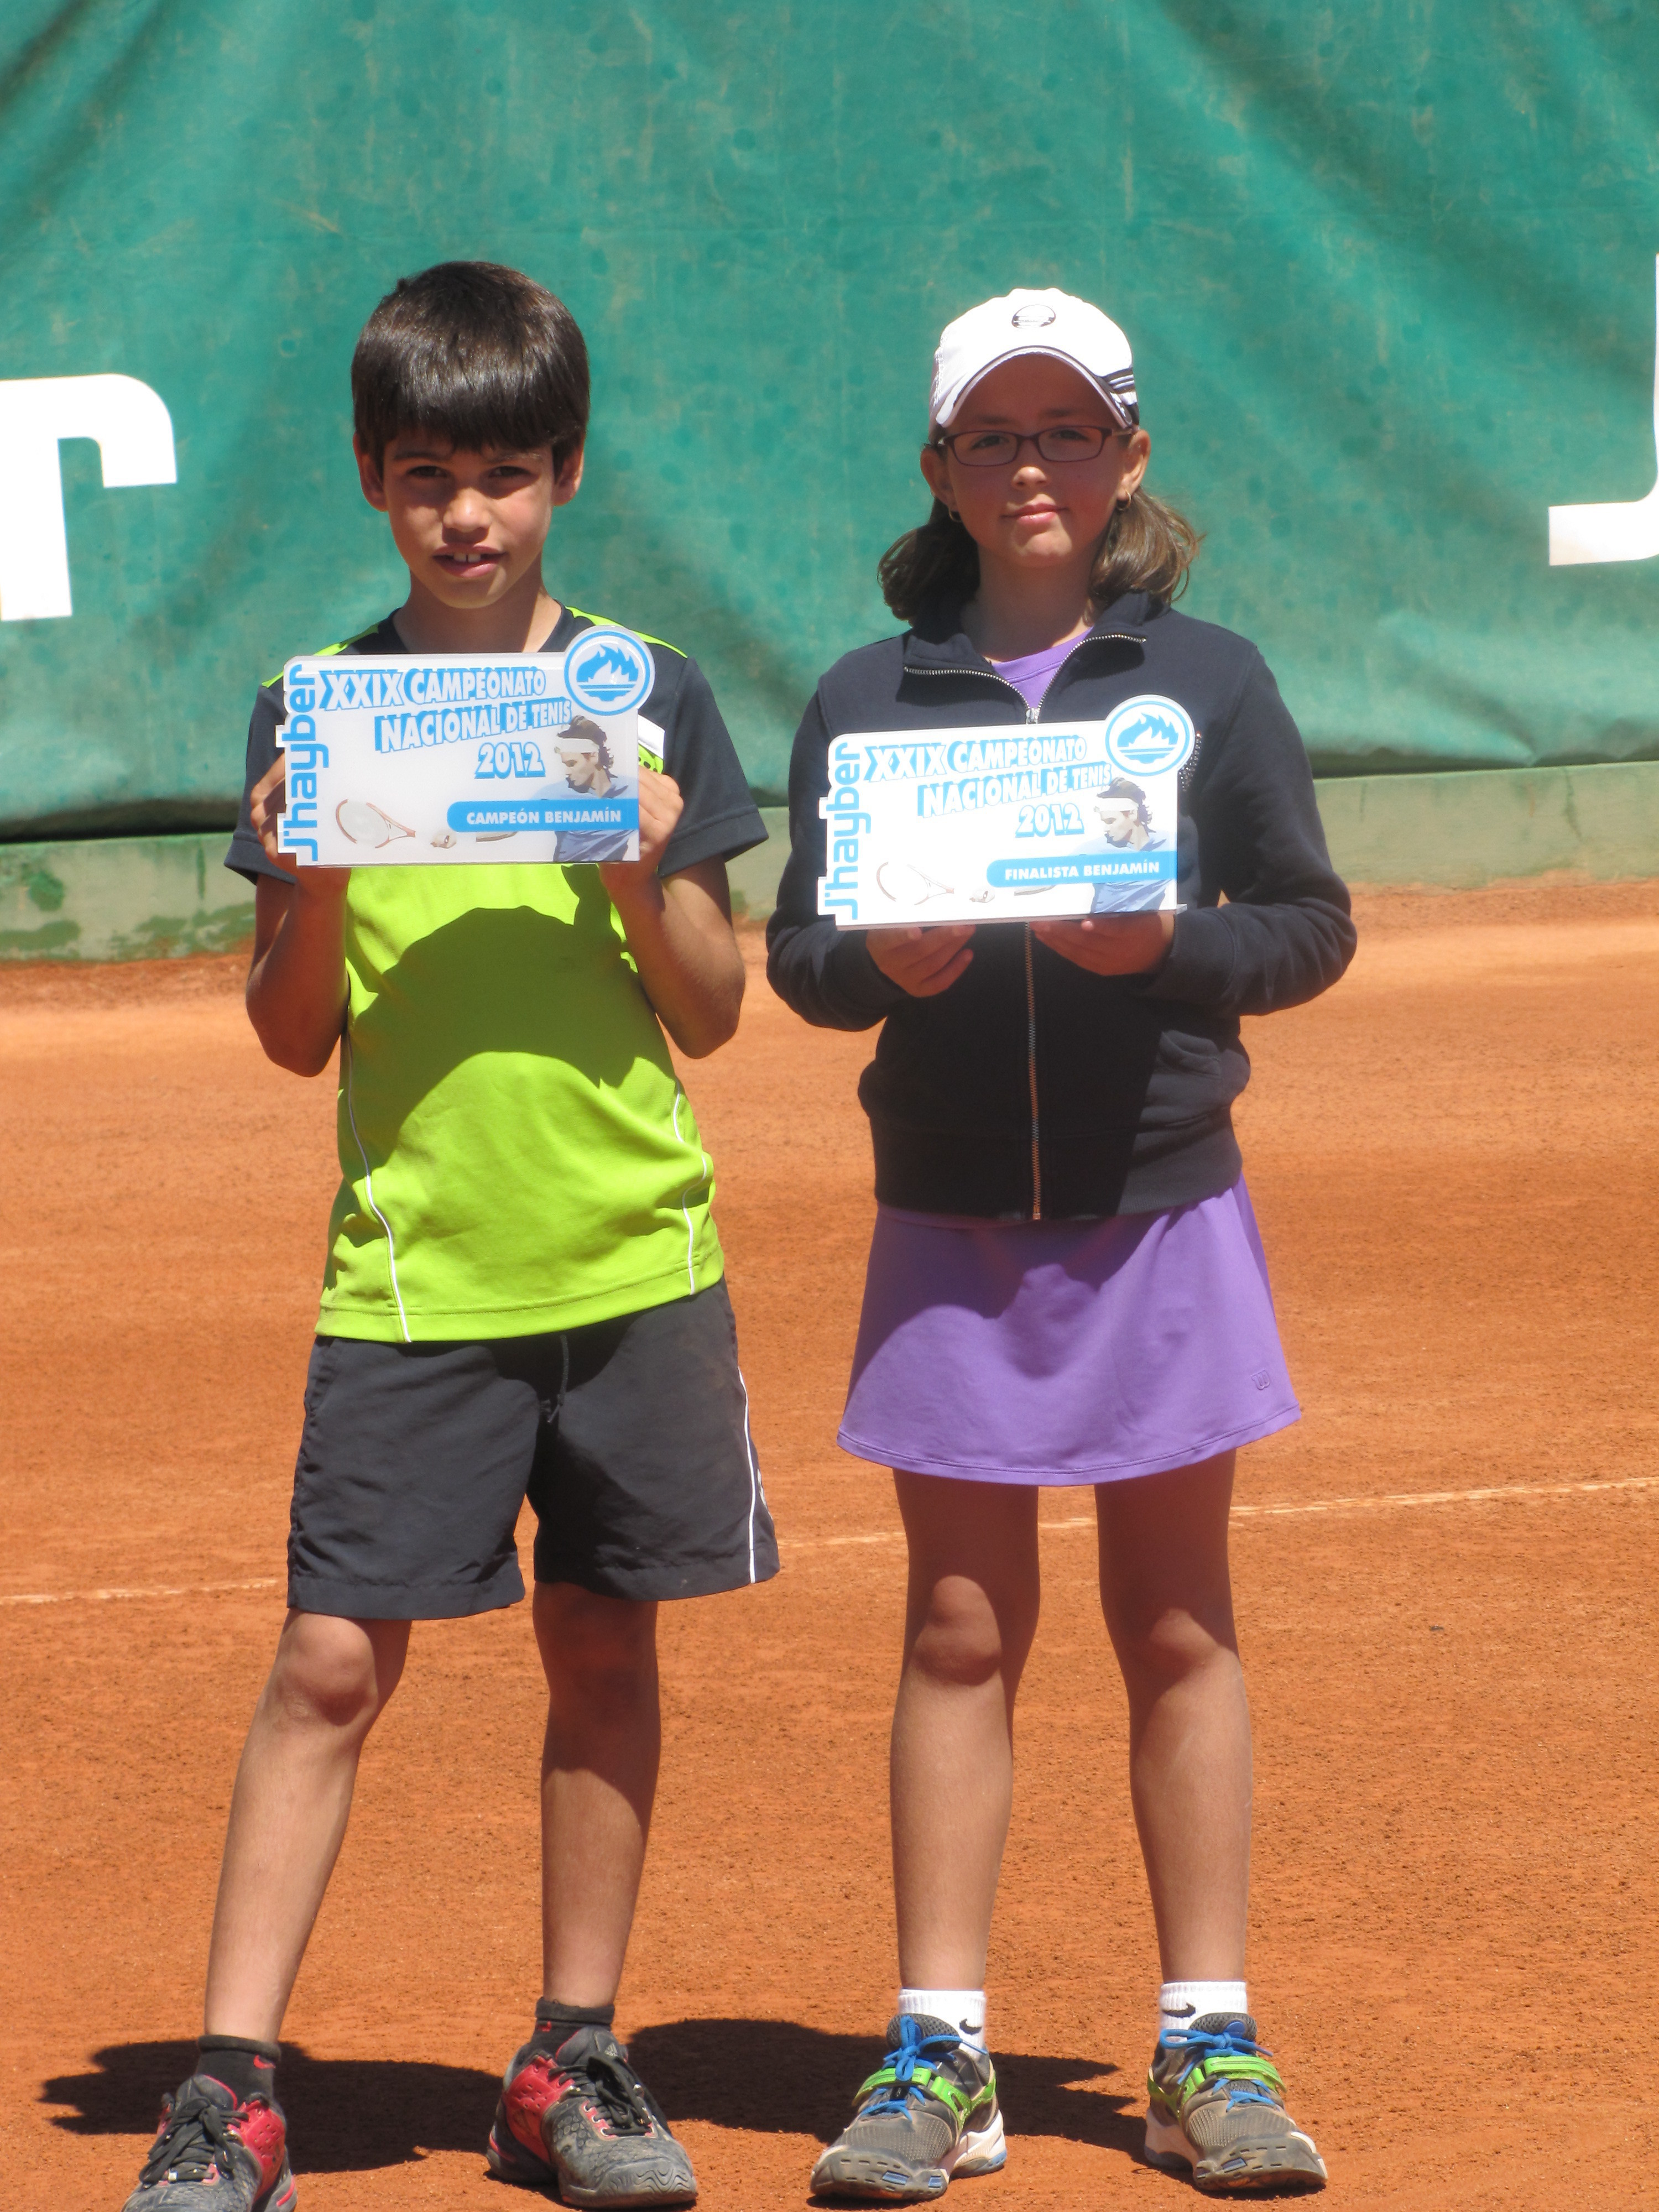 Next to his friend Alba Ray after winning their respective divisions